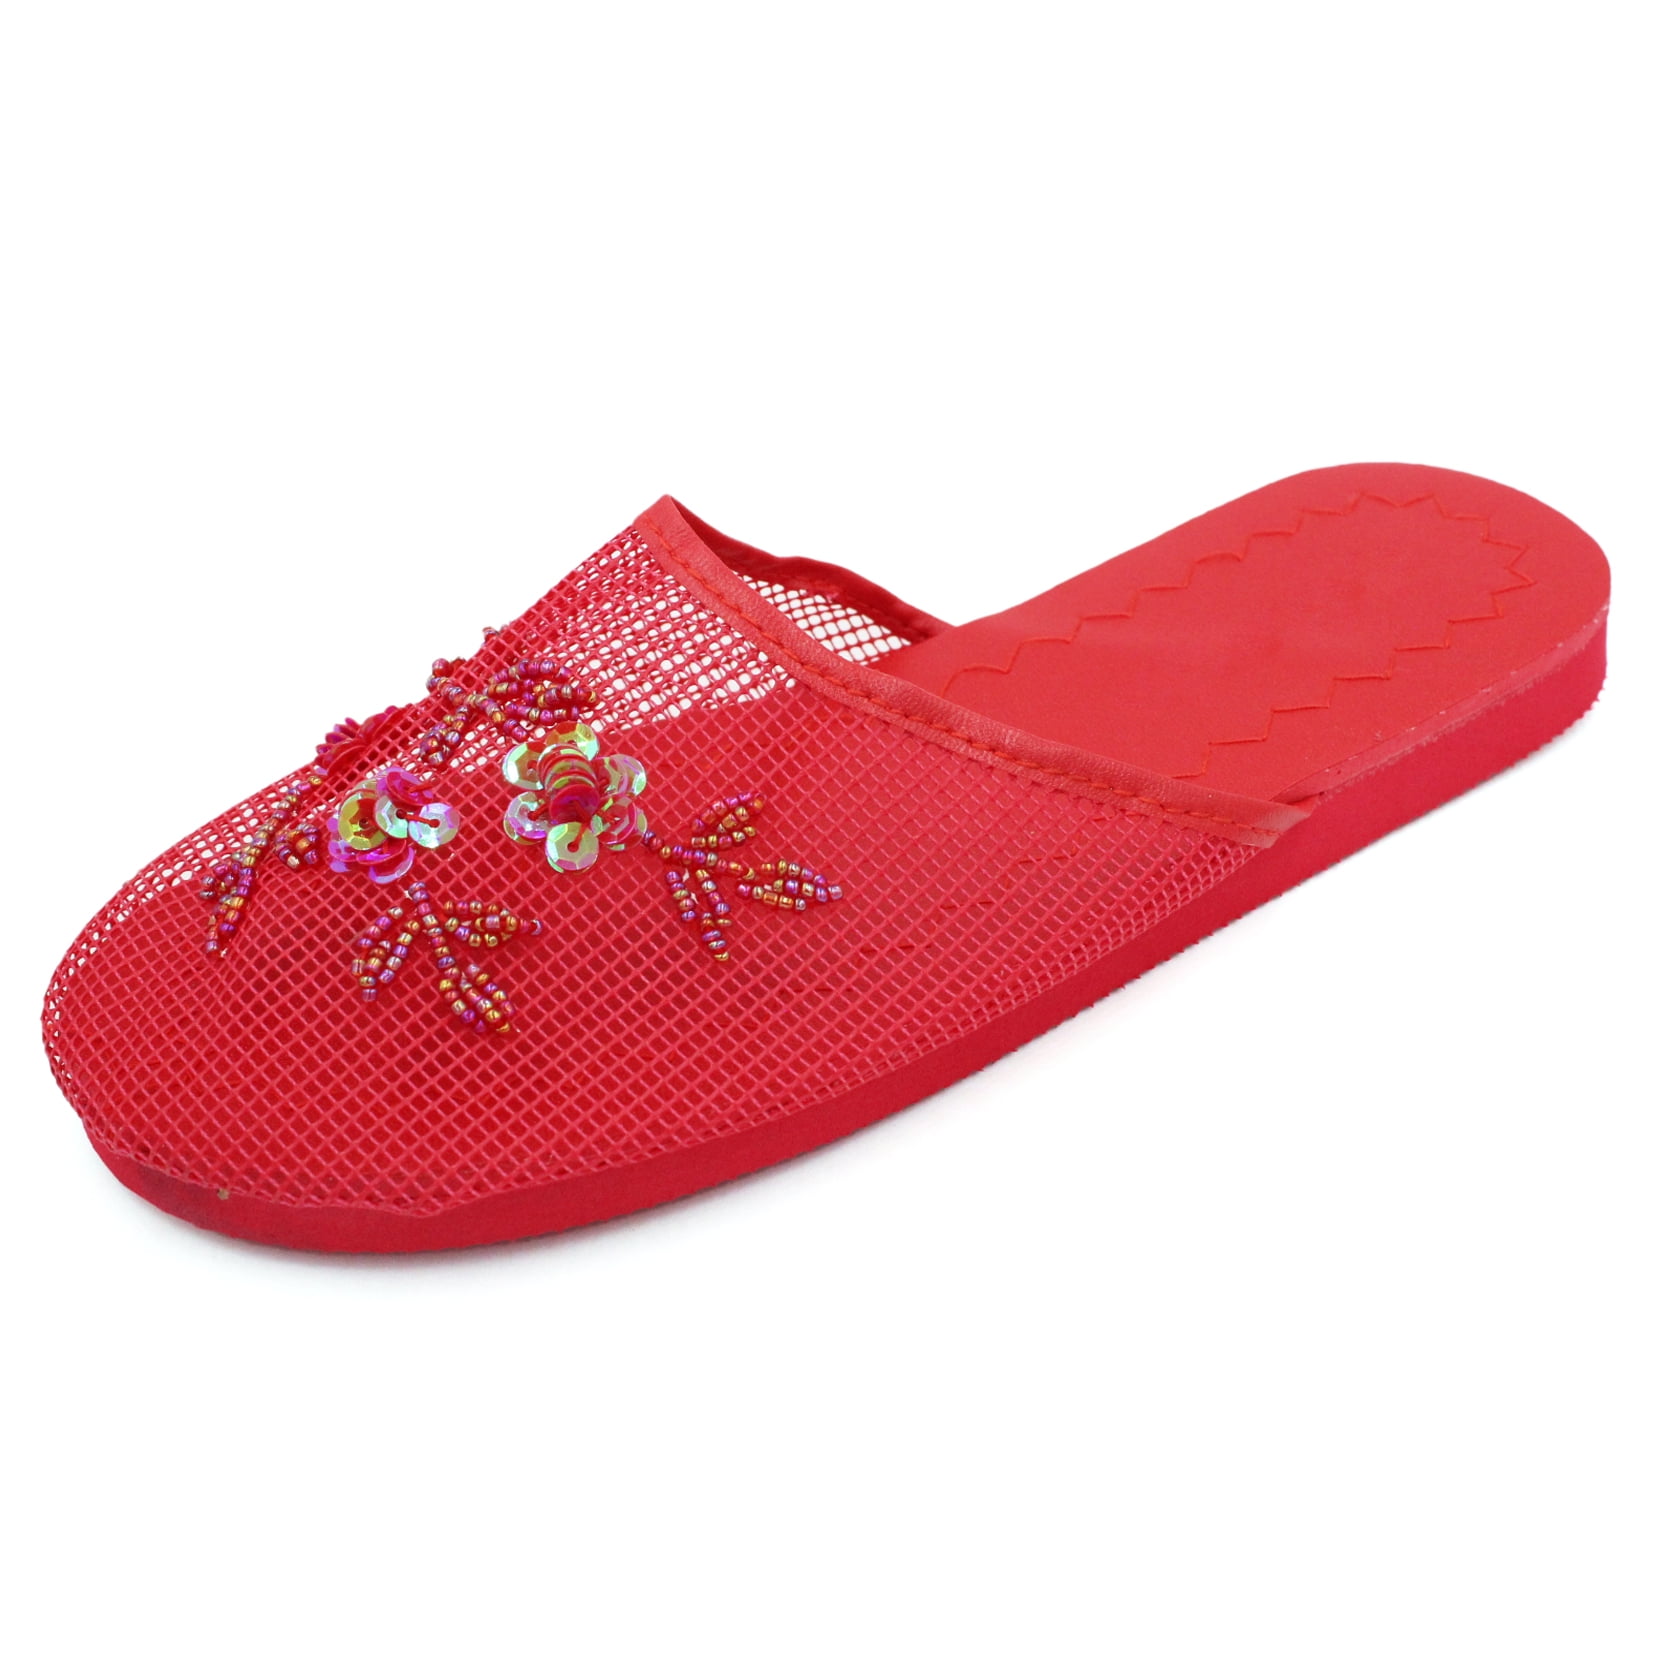 LAVRA Women's Mesh Sequin Beaded Chinese Slippers Floral Embellished - Walmart.com